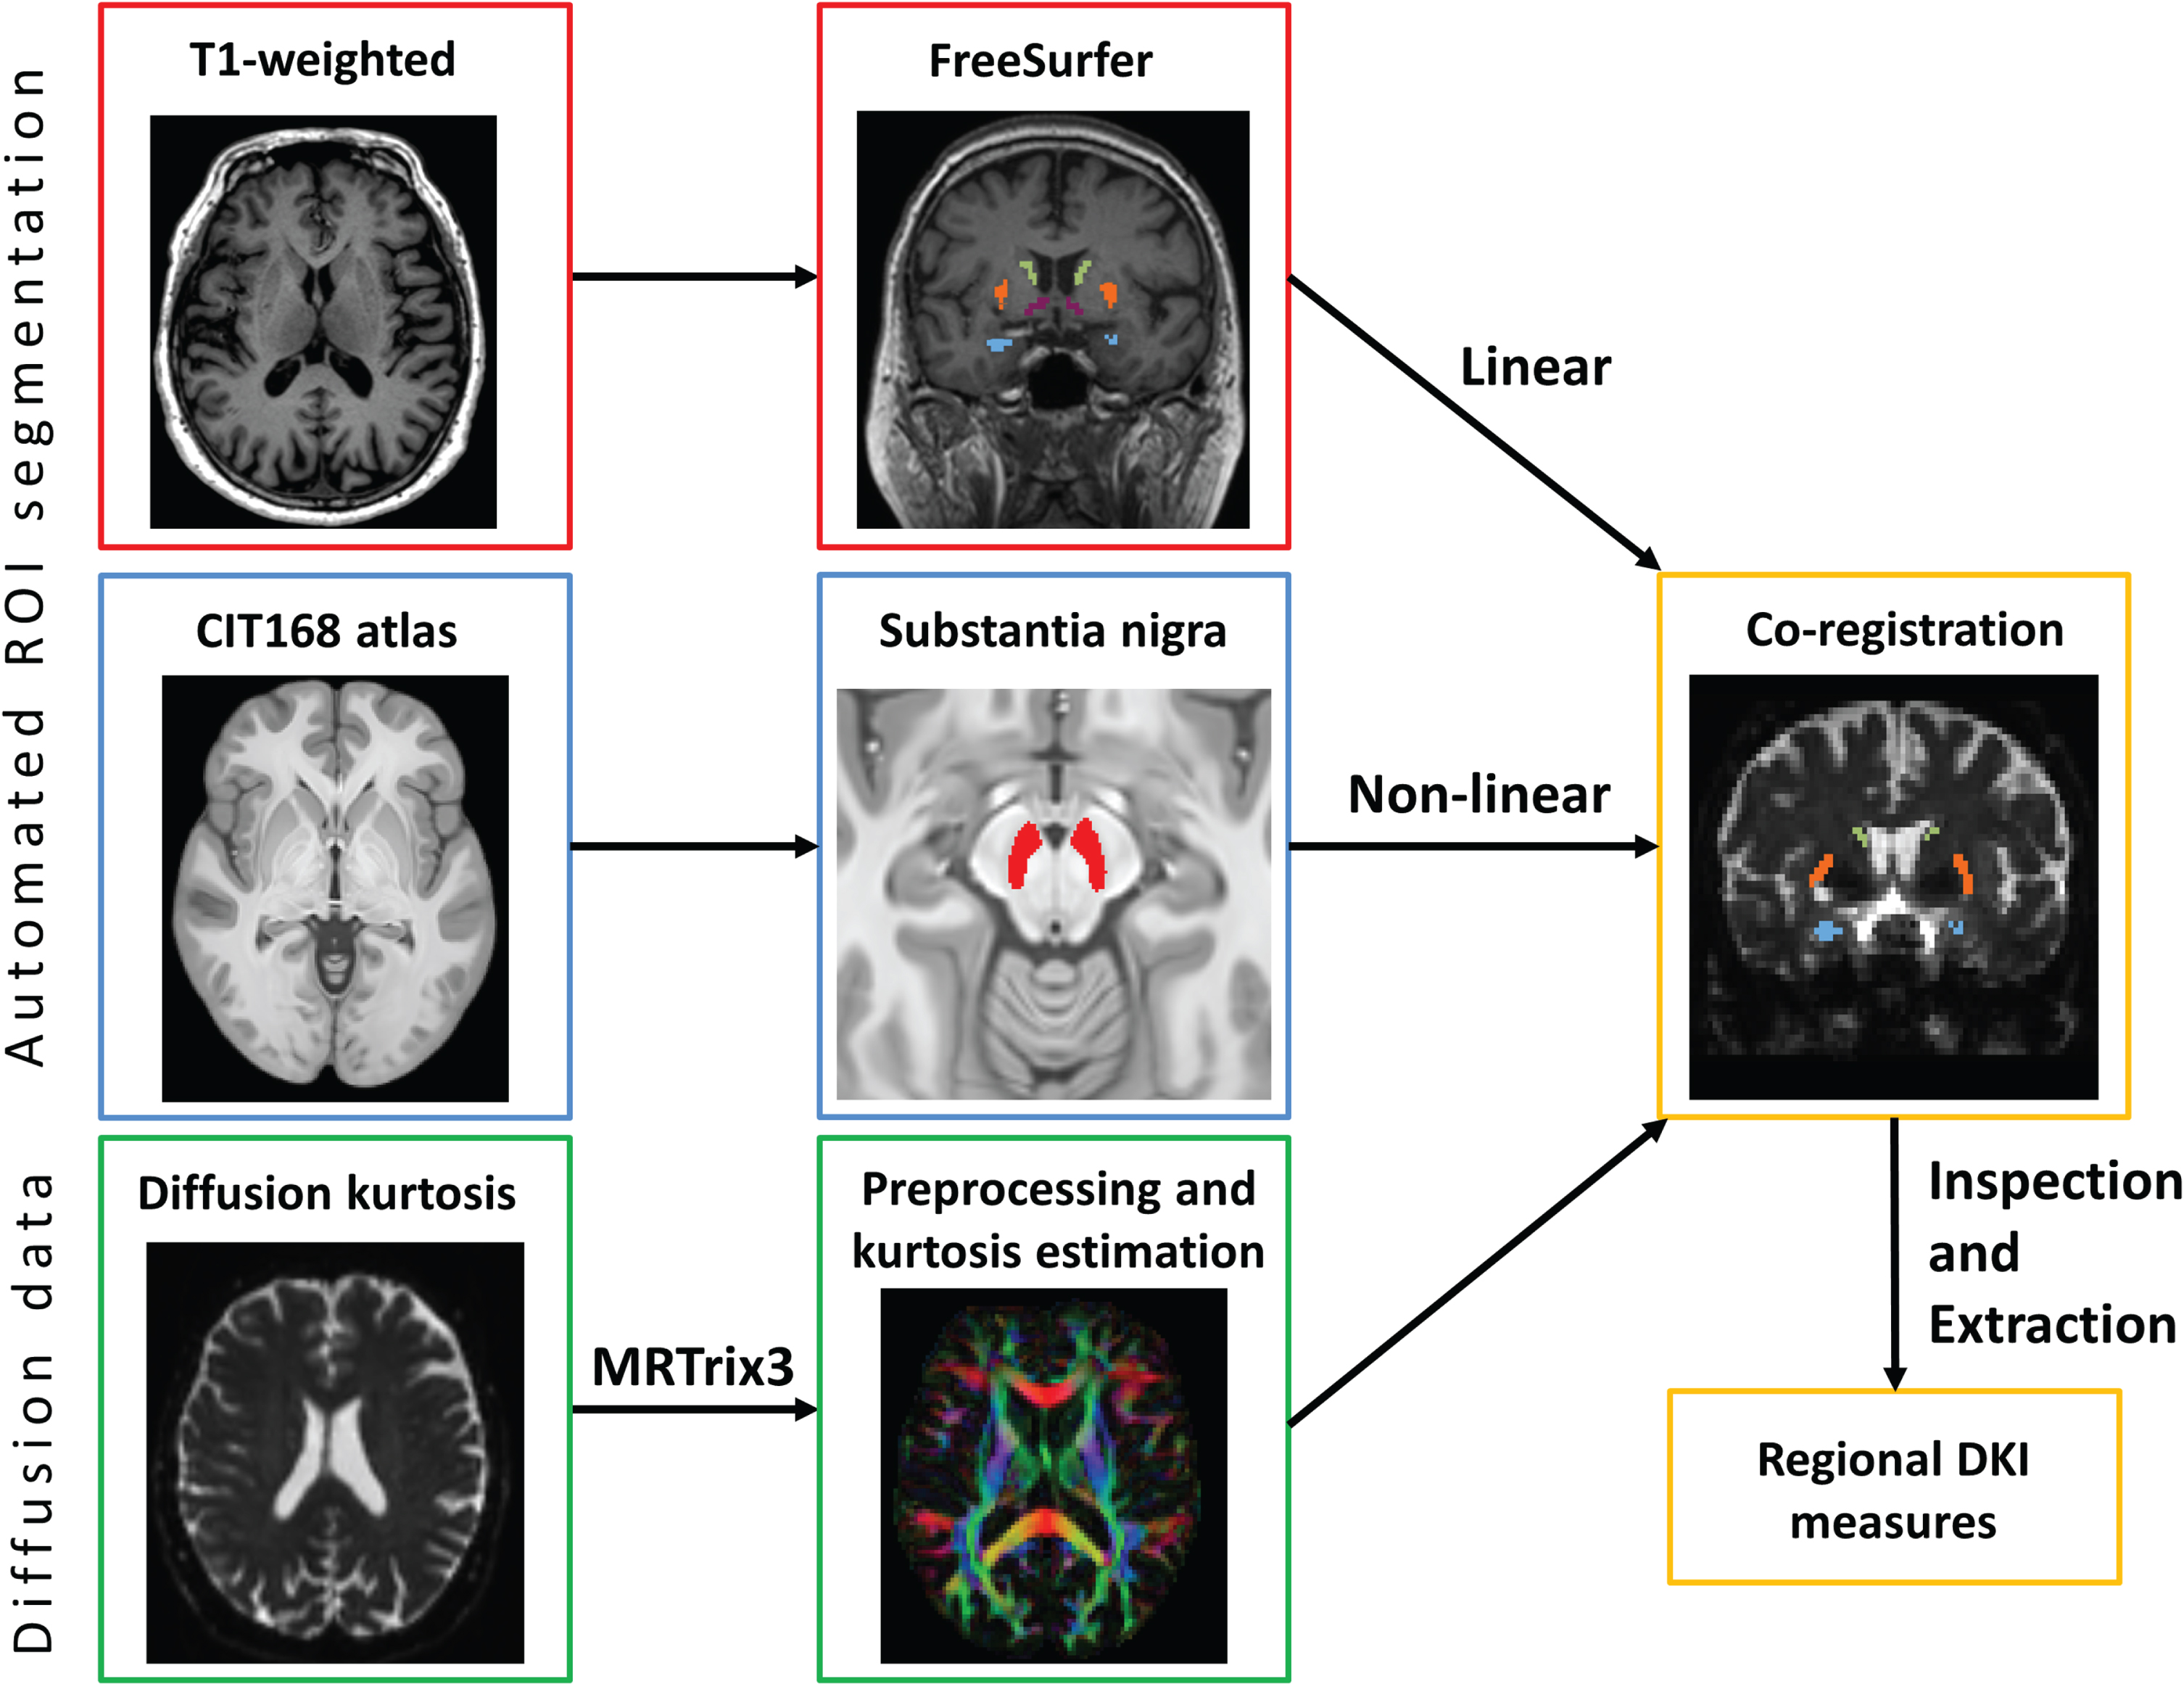 Stages of image processing. Beginning with the raw T1 image, diffusion data and atlases, our processing pipeline included automatic brain segmentation using FreeSurfer, substantia nigra mask from the CITI atlas, and the preprocessing of the diffusion data using MRTrix3, before co-registration of the three to extract diffusion kurtosis imaging values for key regions of interest. Images of T1-weighted and diffusion data were taken from an example participant.